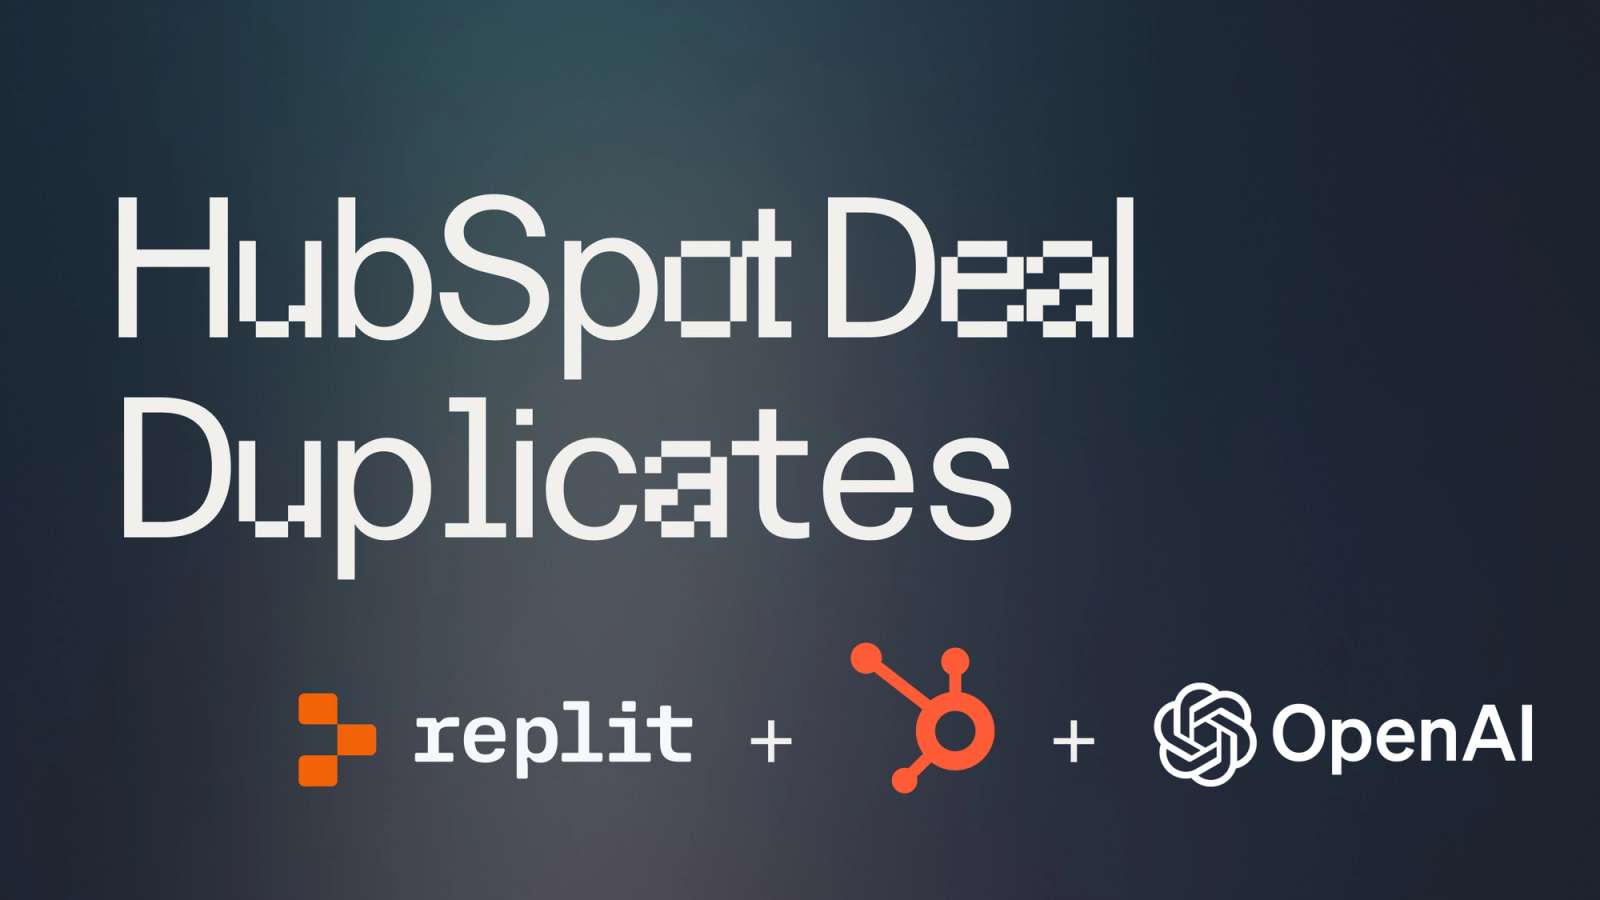 "HubSpot Deal Duplicates" title with Replit, HubSpot, and OpenAI logos in bottom-right corner